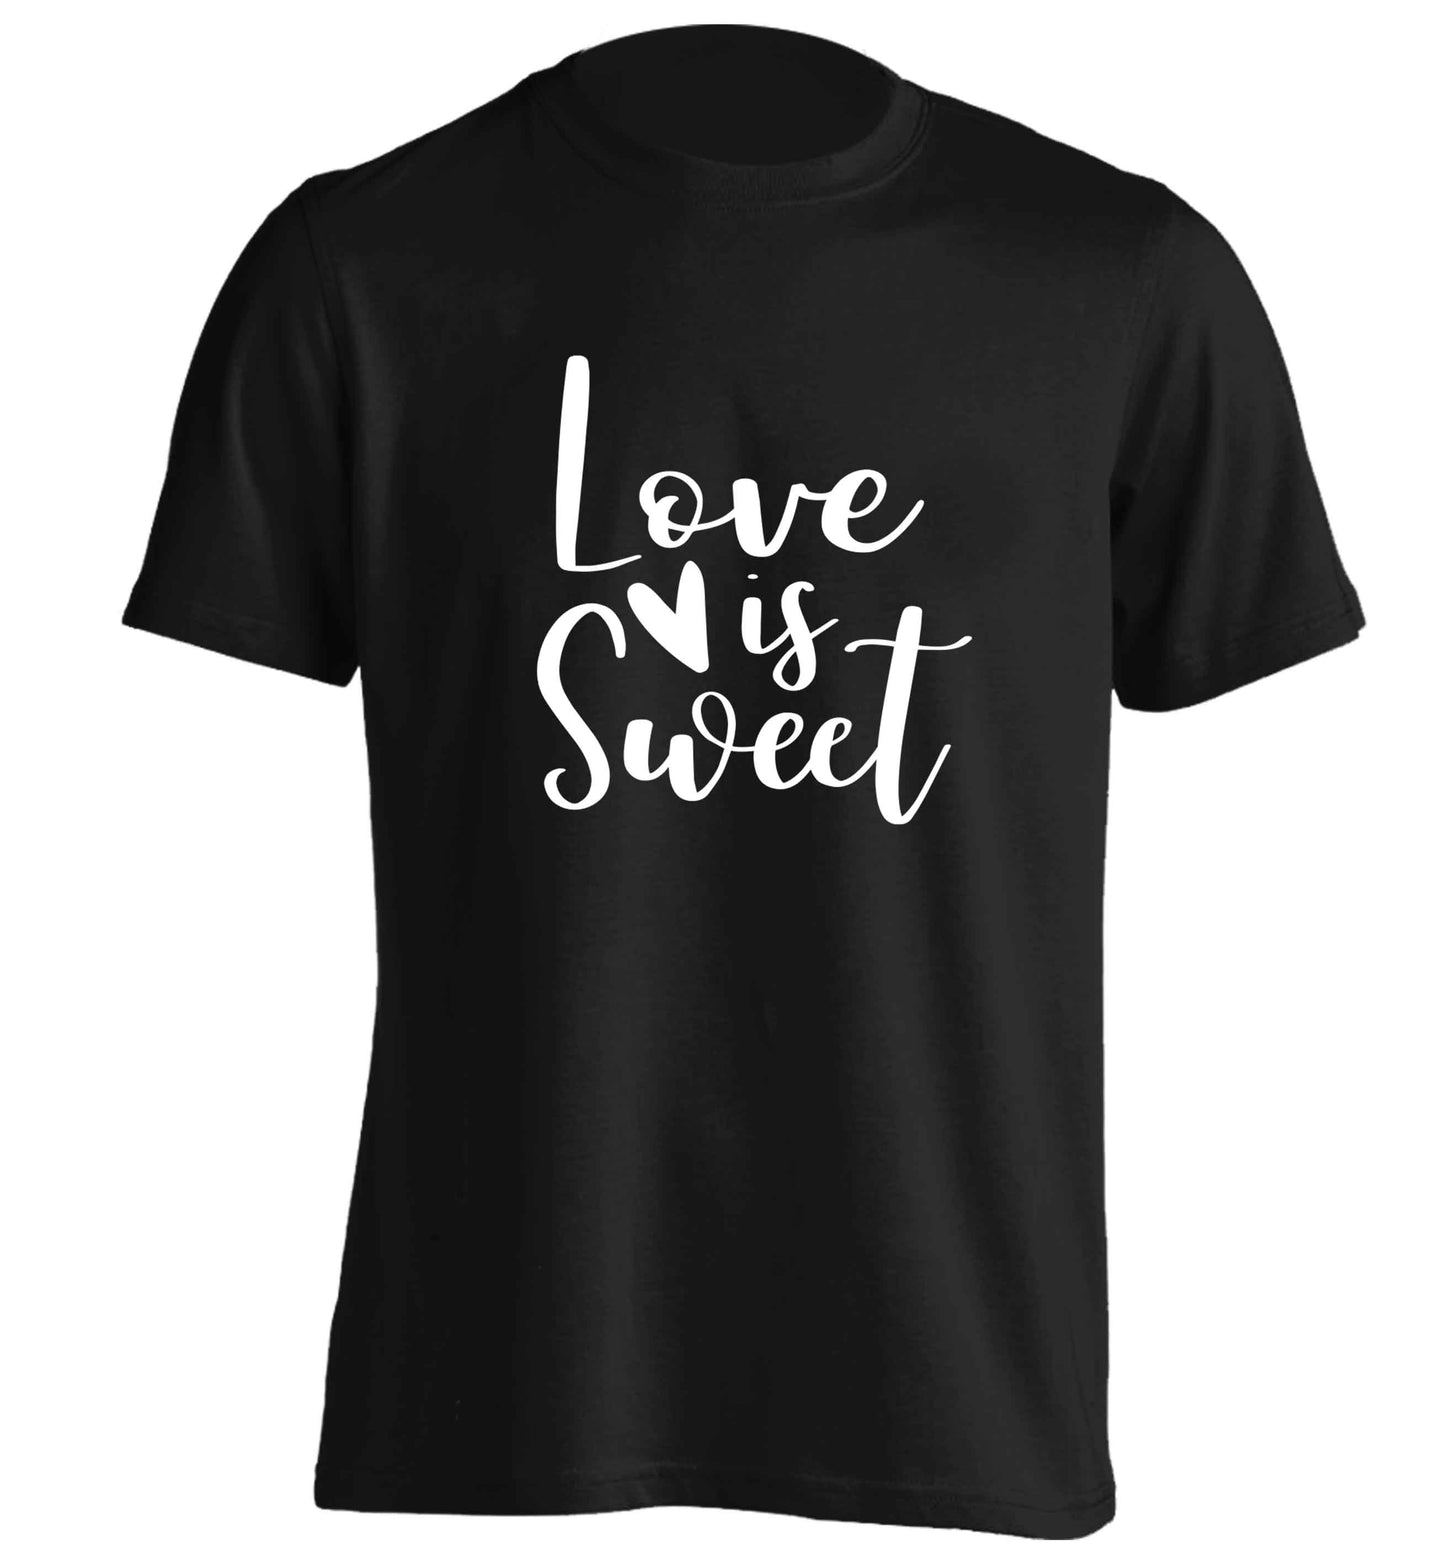 Love really does make the world go round! Ideal for weddings, valentines or just simply to show someone you love them!  adults unisex black Tshirt 2XL